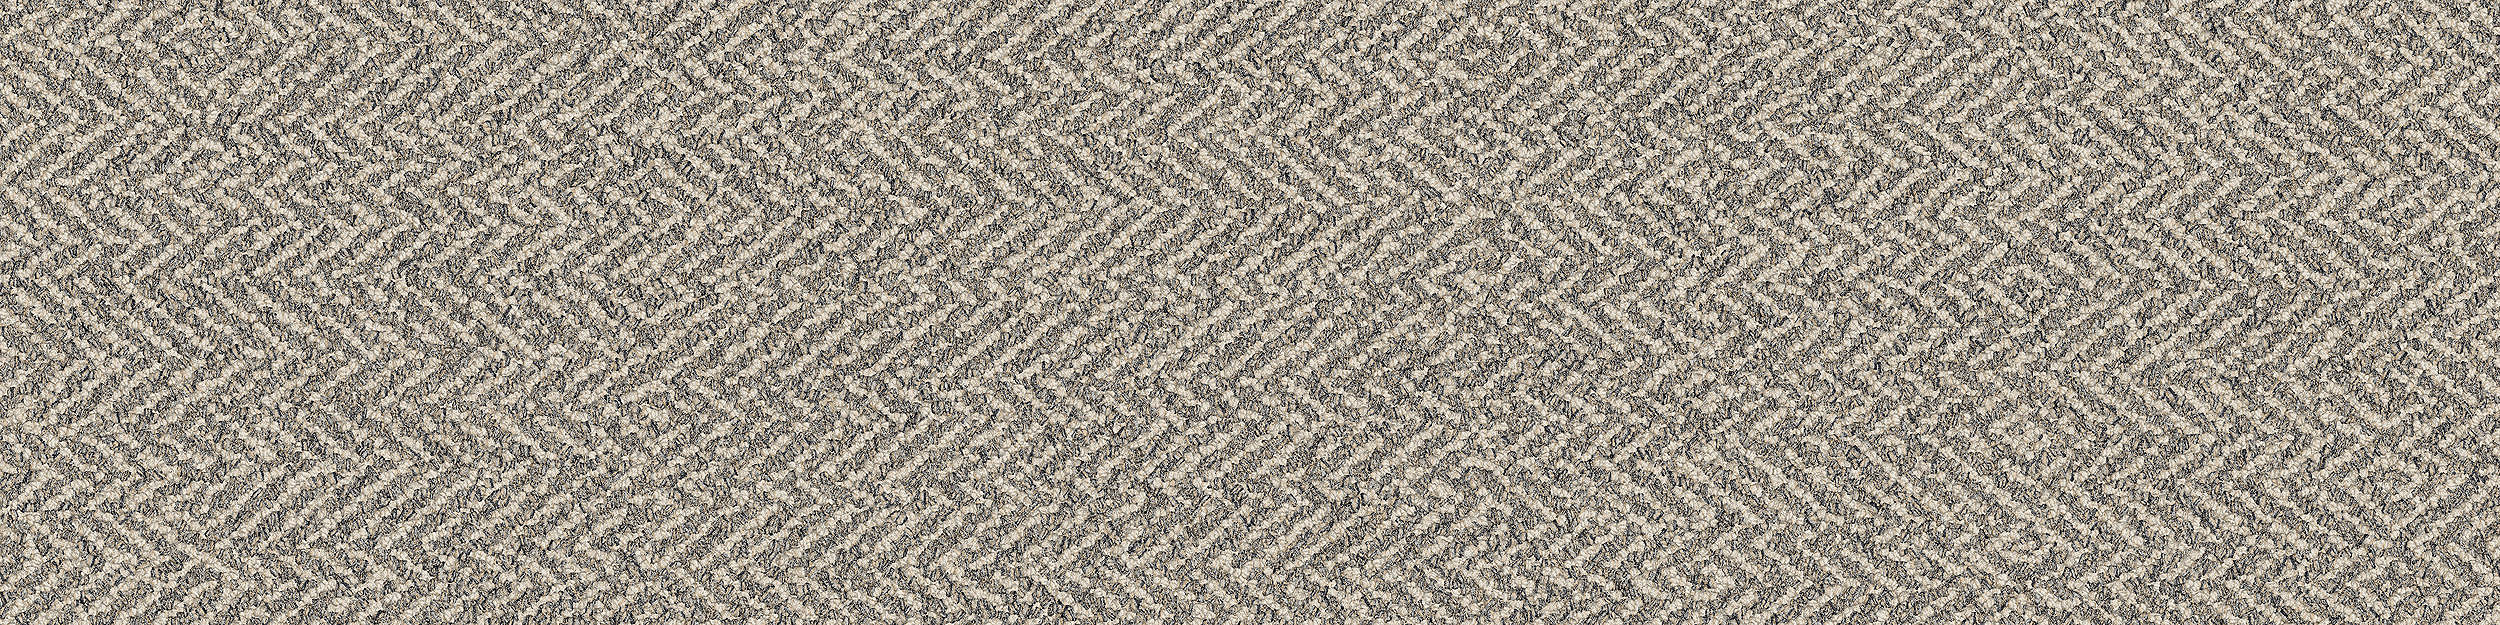 Third Space 308 Carpet Tile in Shell image number 6